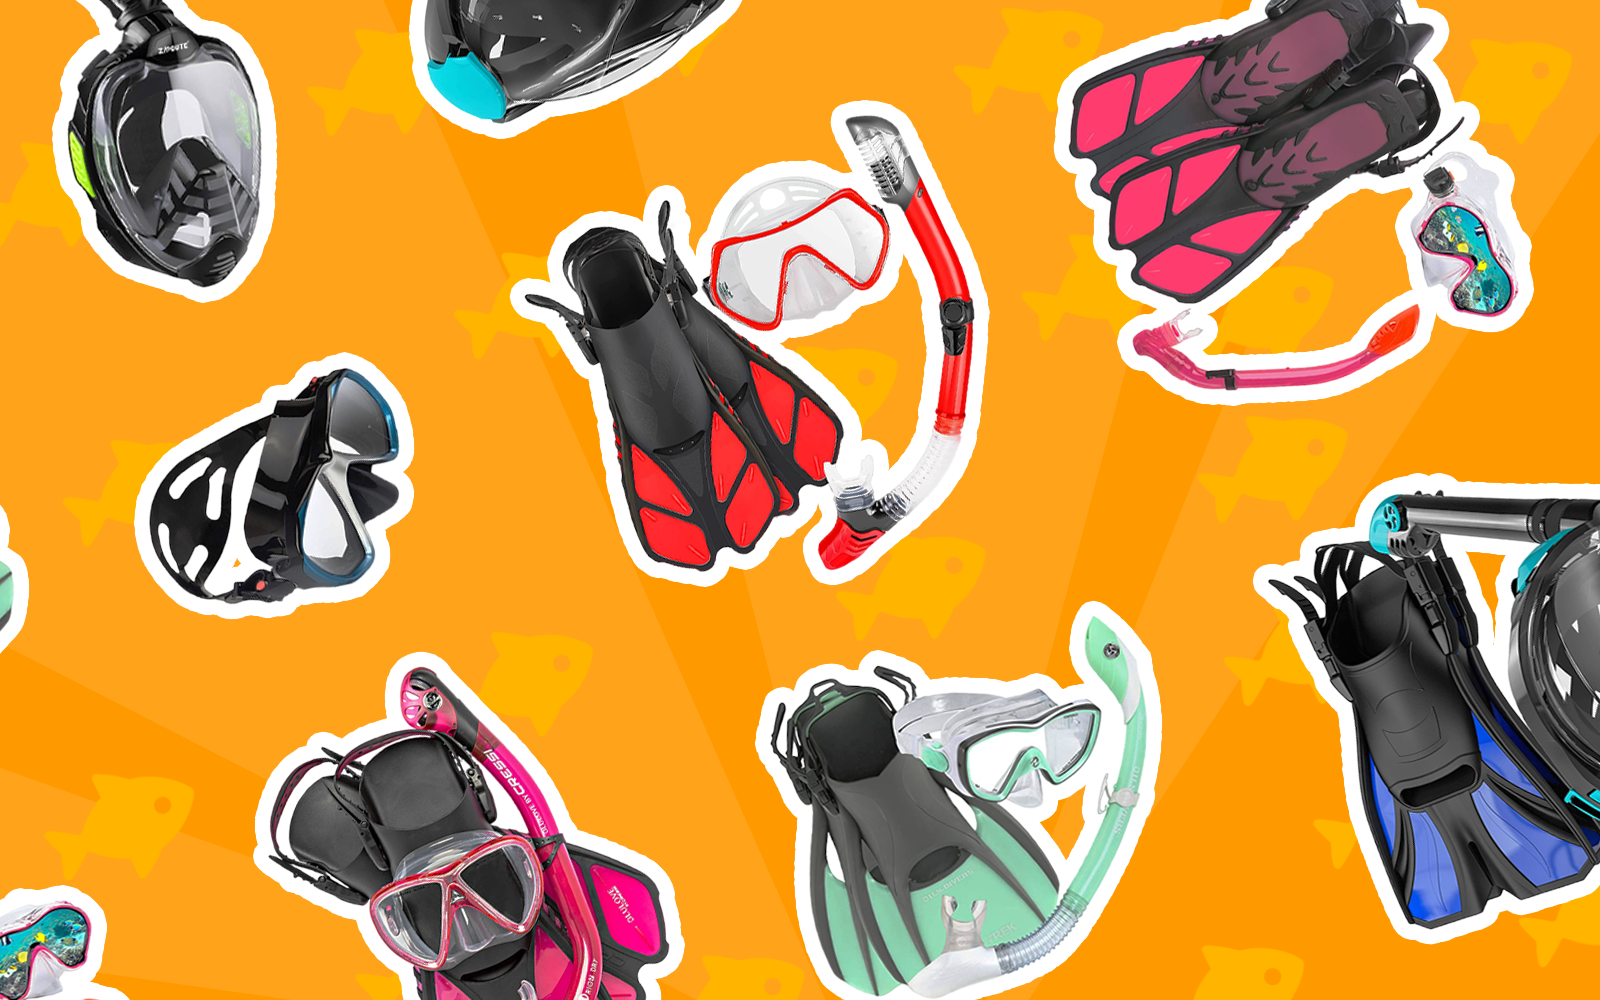 Image of the best snorkeling gear displayed on an orange background